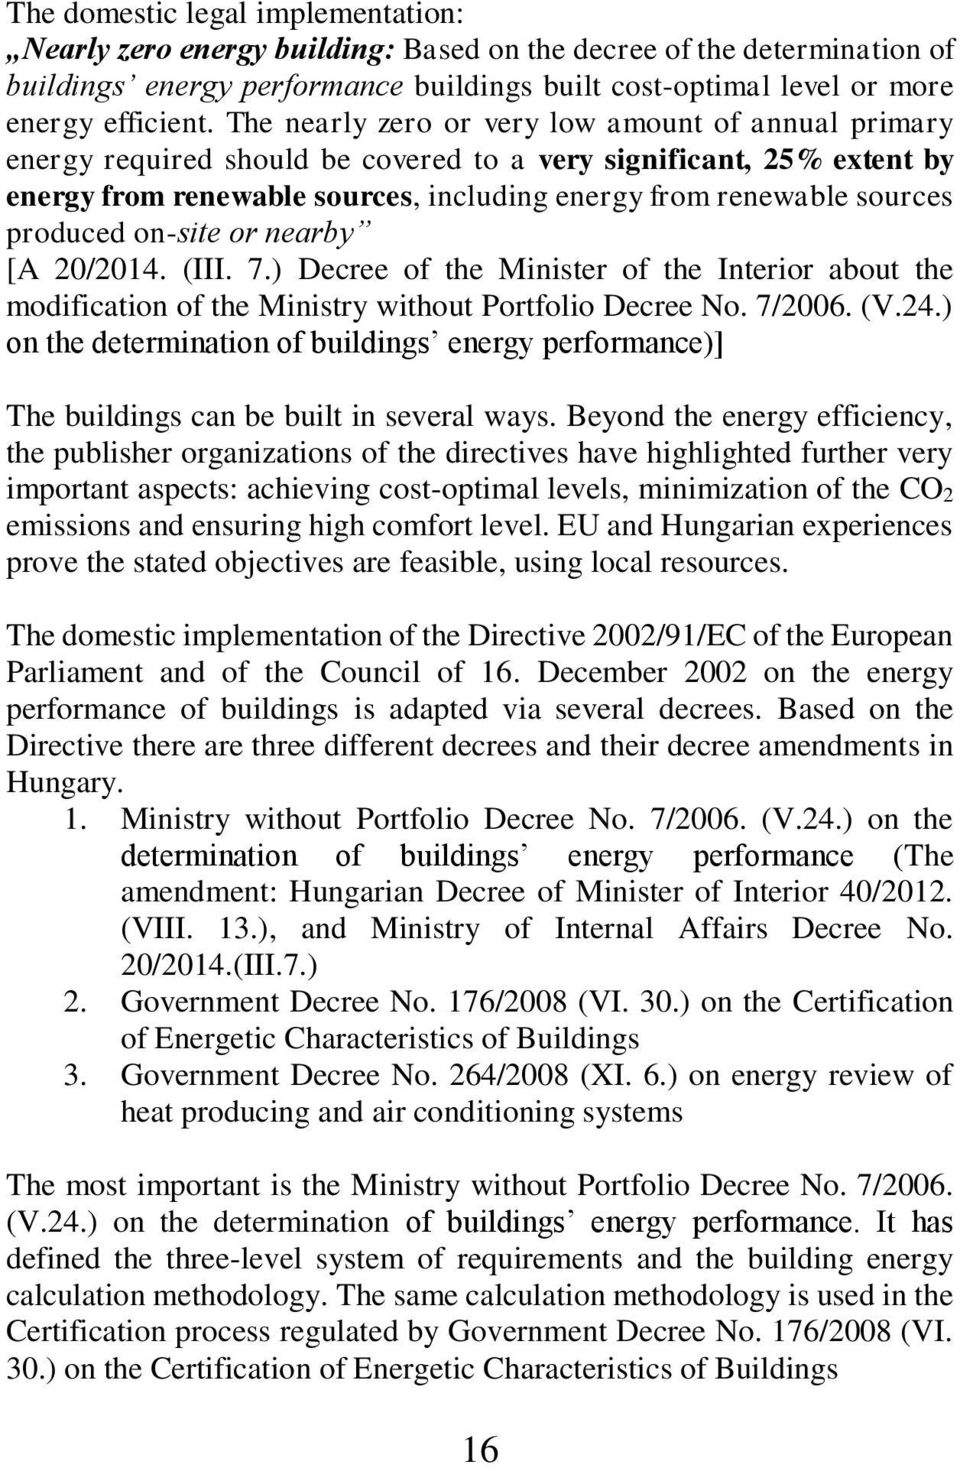 produced on-site or nearby [A 20/2014. (III. 7.) Decree of the Minister of the Interior about the modification of the Ministry without Portfolio Decree No. 7/2006. (V.24.